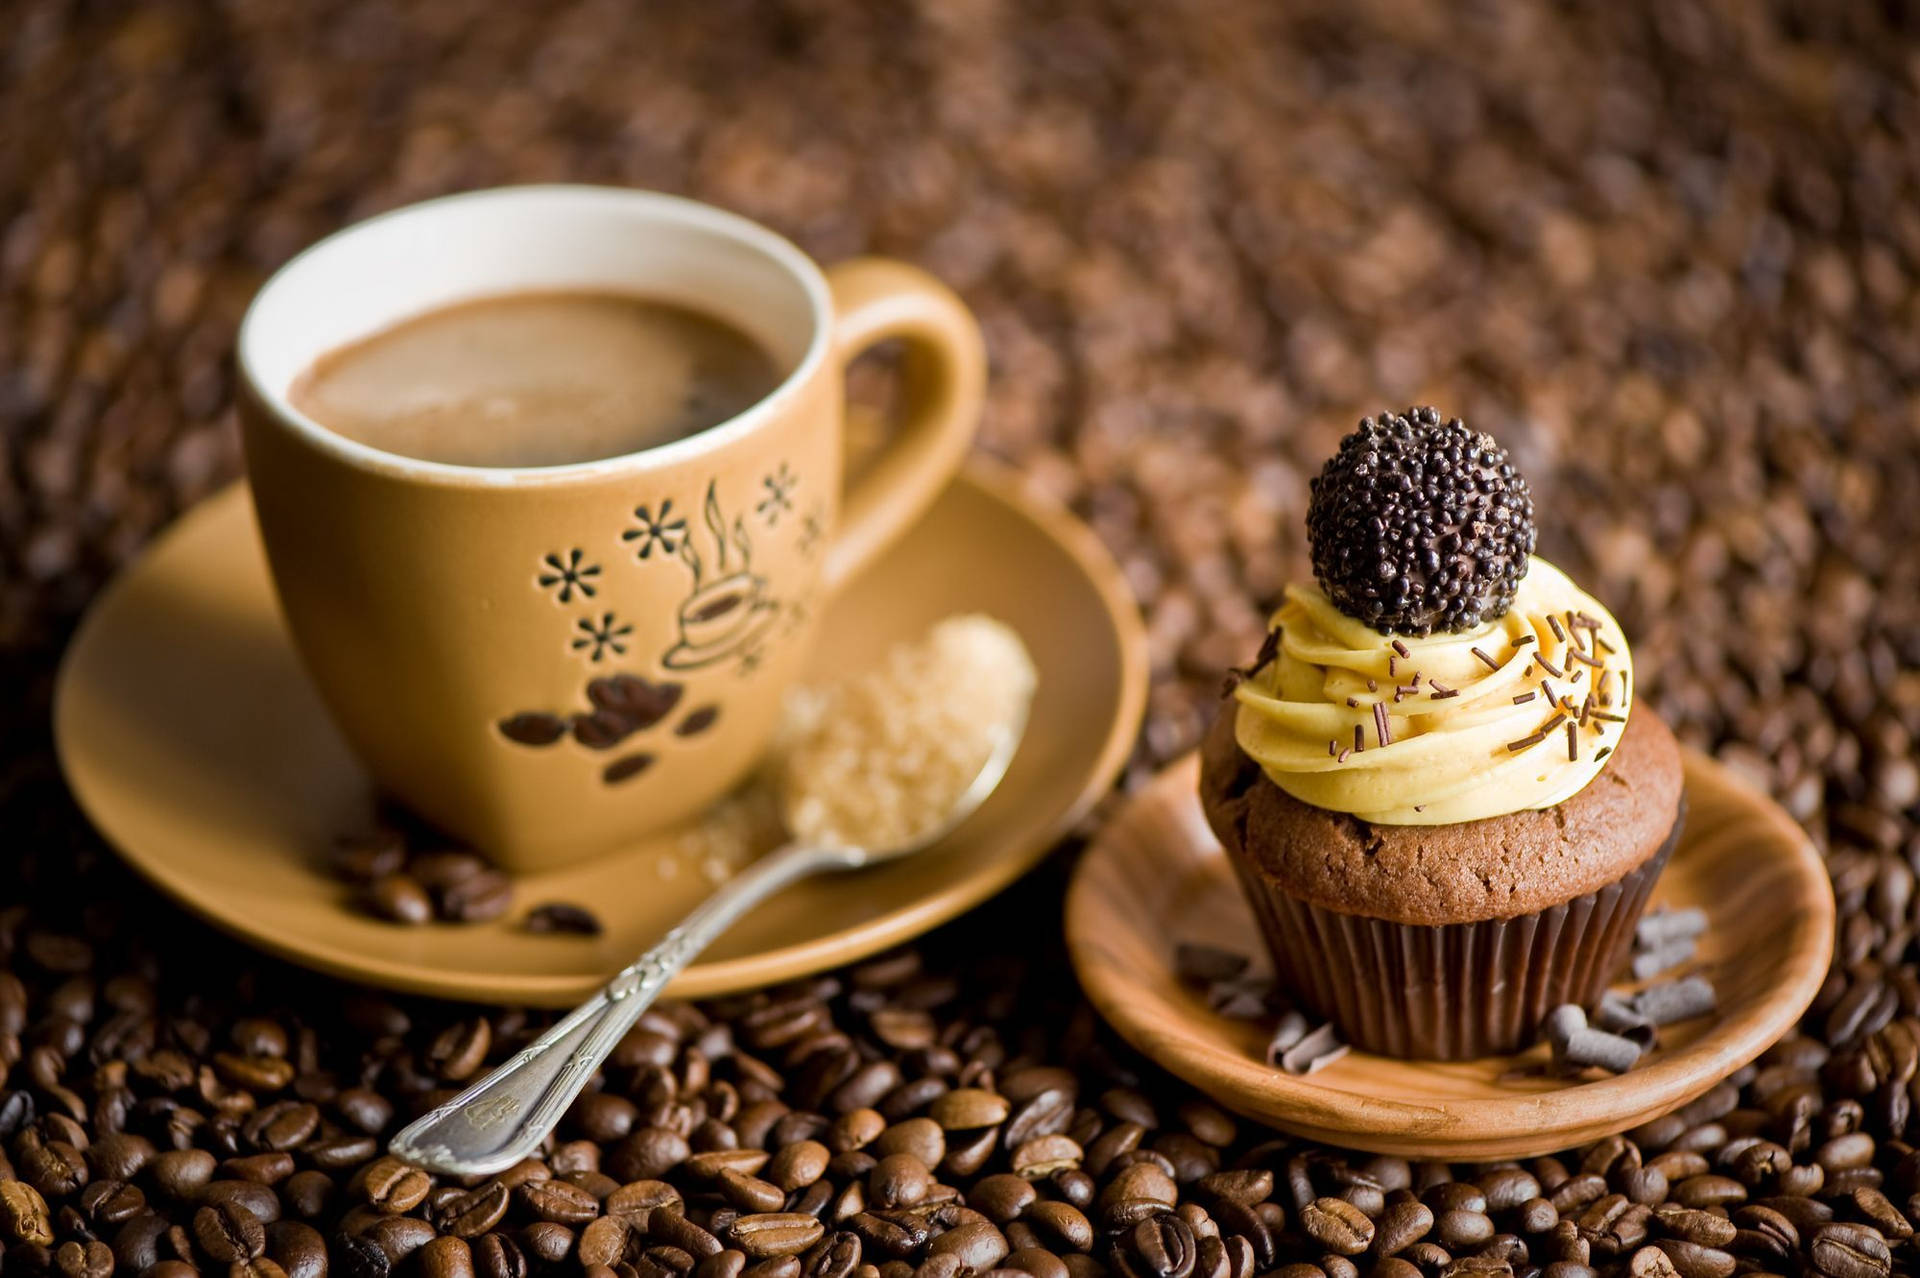 Cupcake And Coffee Aesthetic Wallpaper